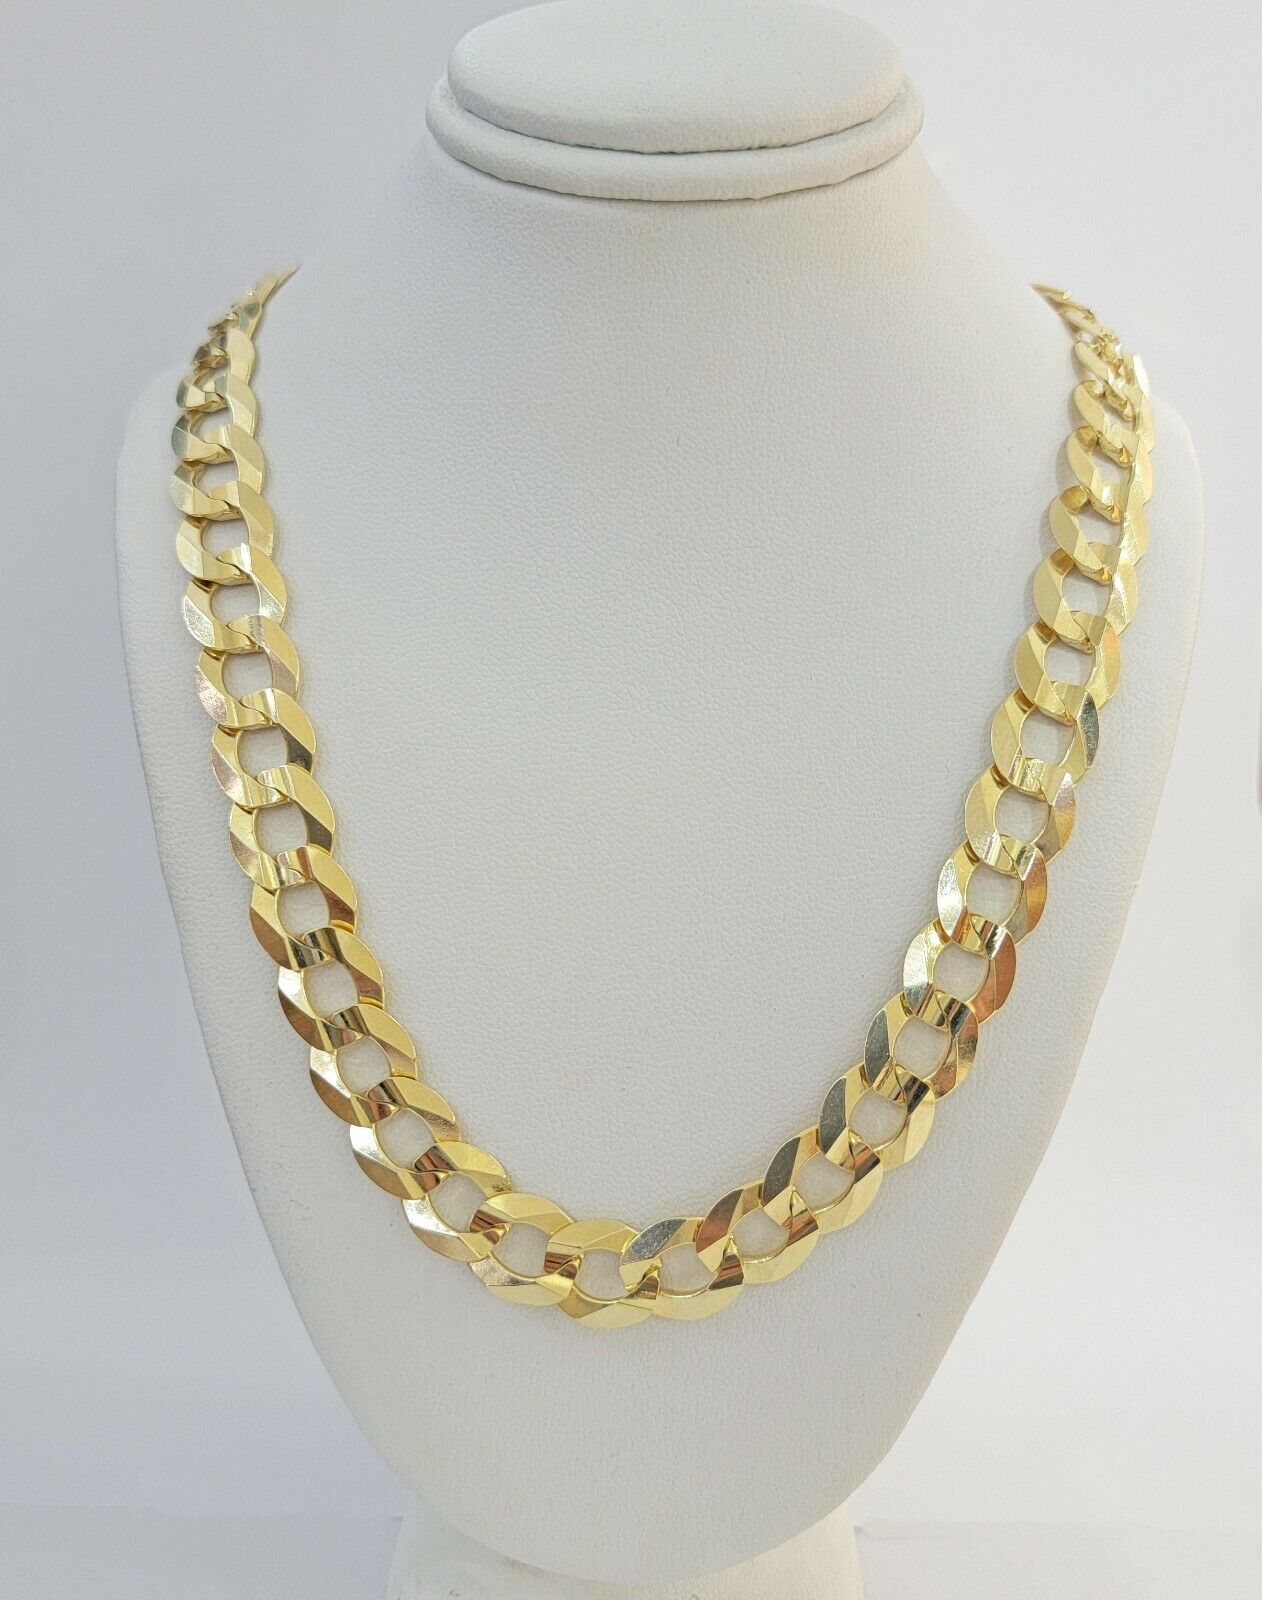 Real 14k Gold Cuban Curb Link Necklace Chain 11mm  22